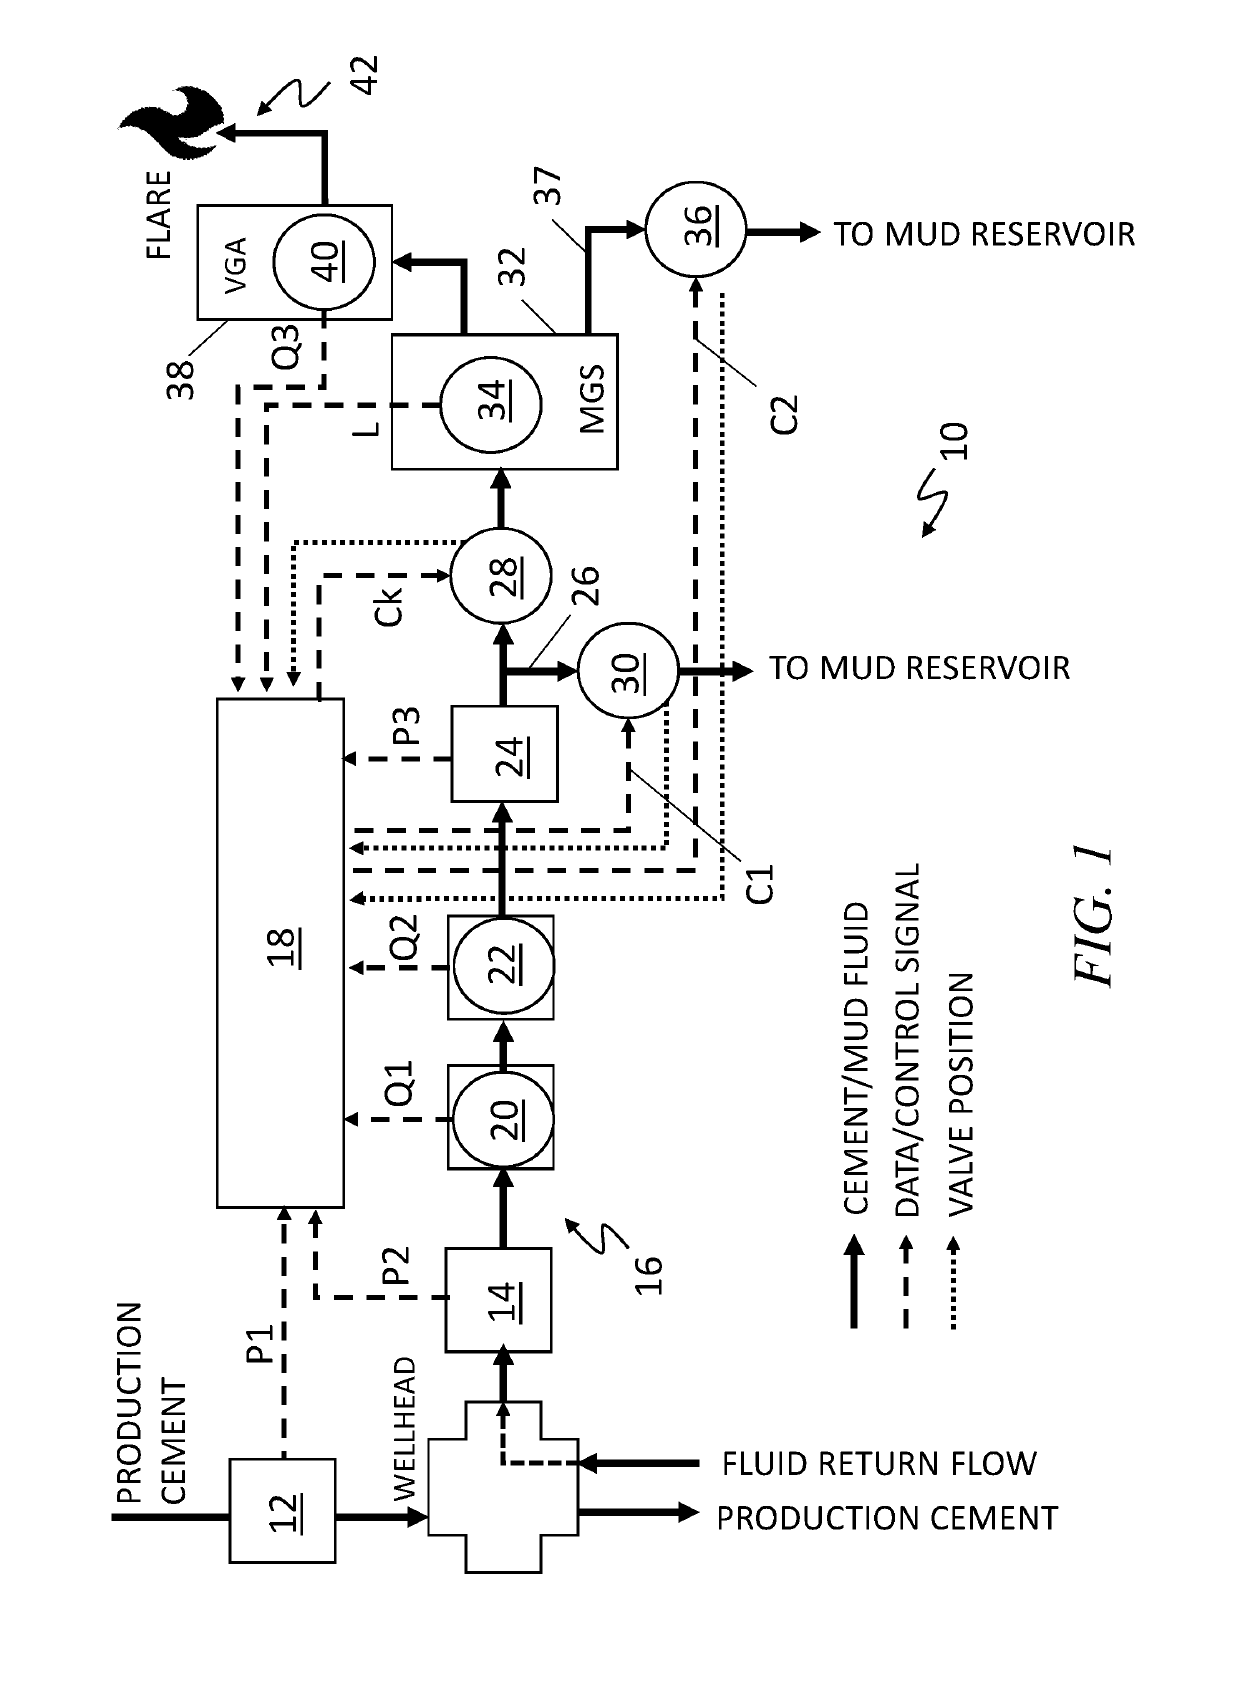 System and Method for Intelligent Flow Control System for Production Cementing Returns